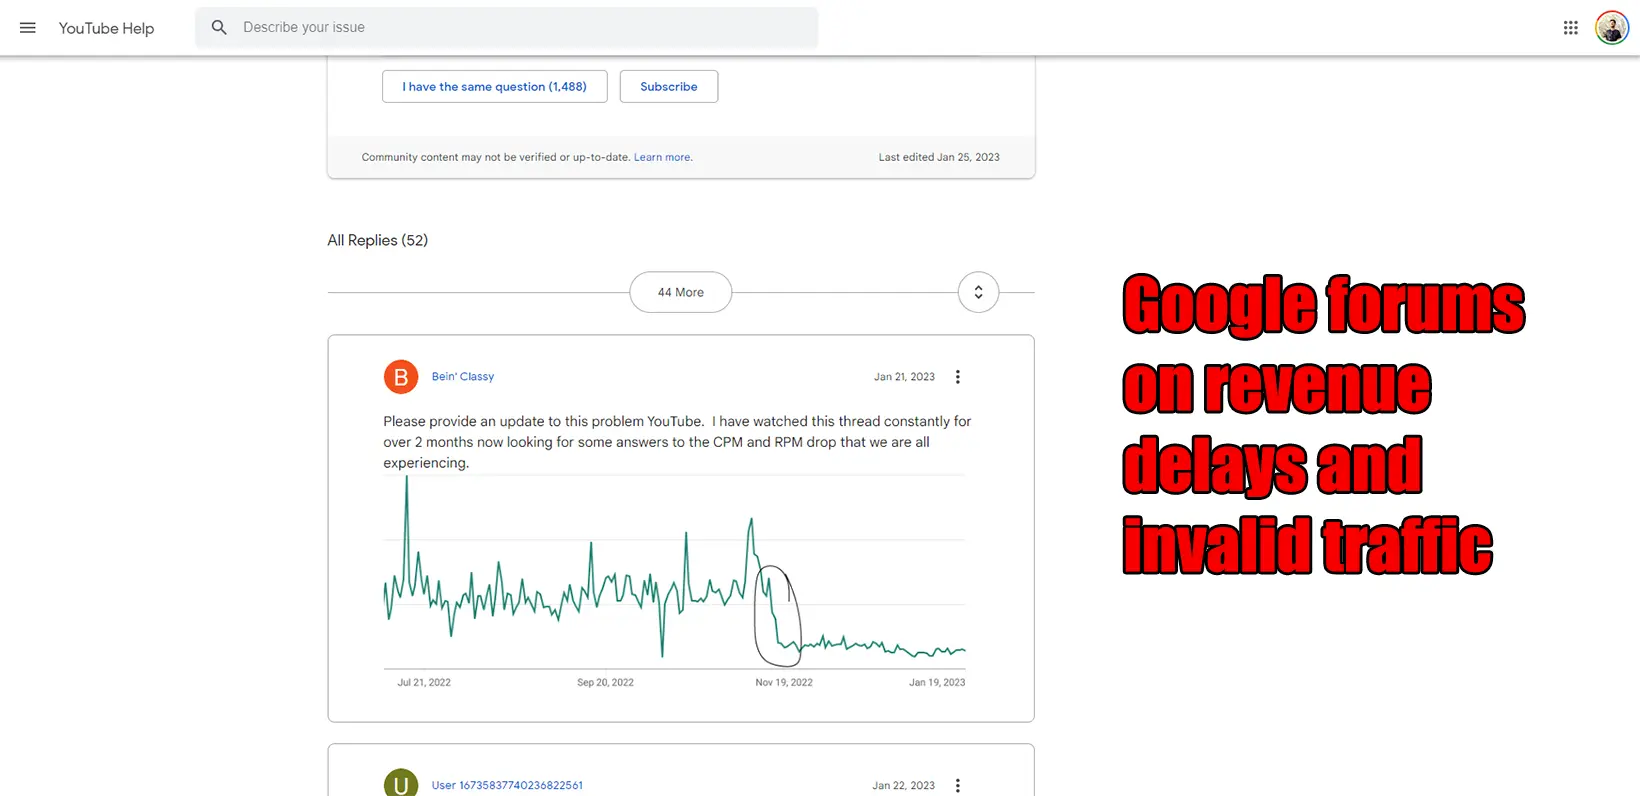 Google forums on revenue delays and invalid traffic